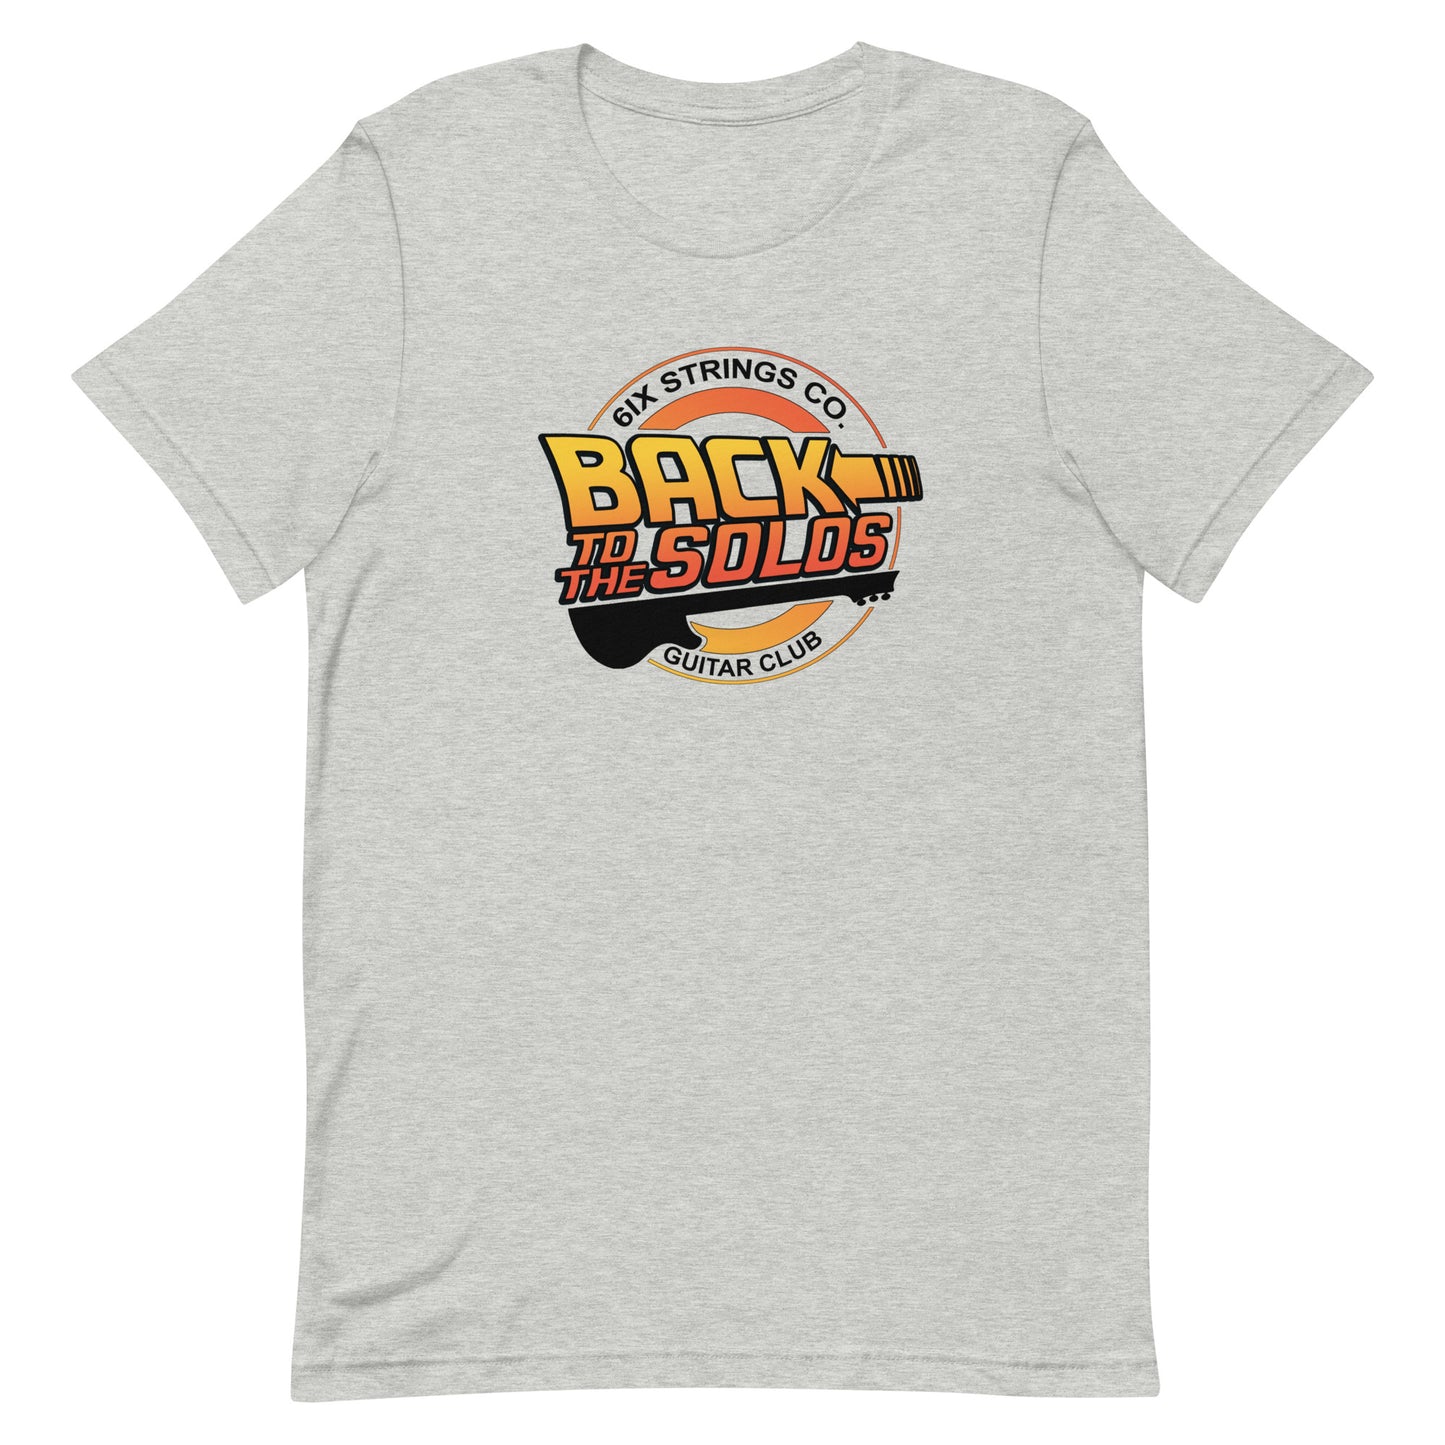 'Back To The Solos' - Grey Tee